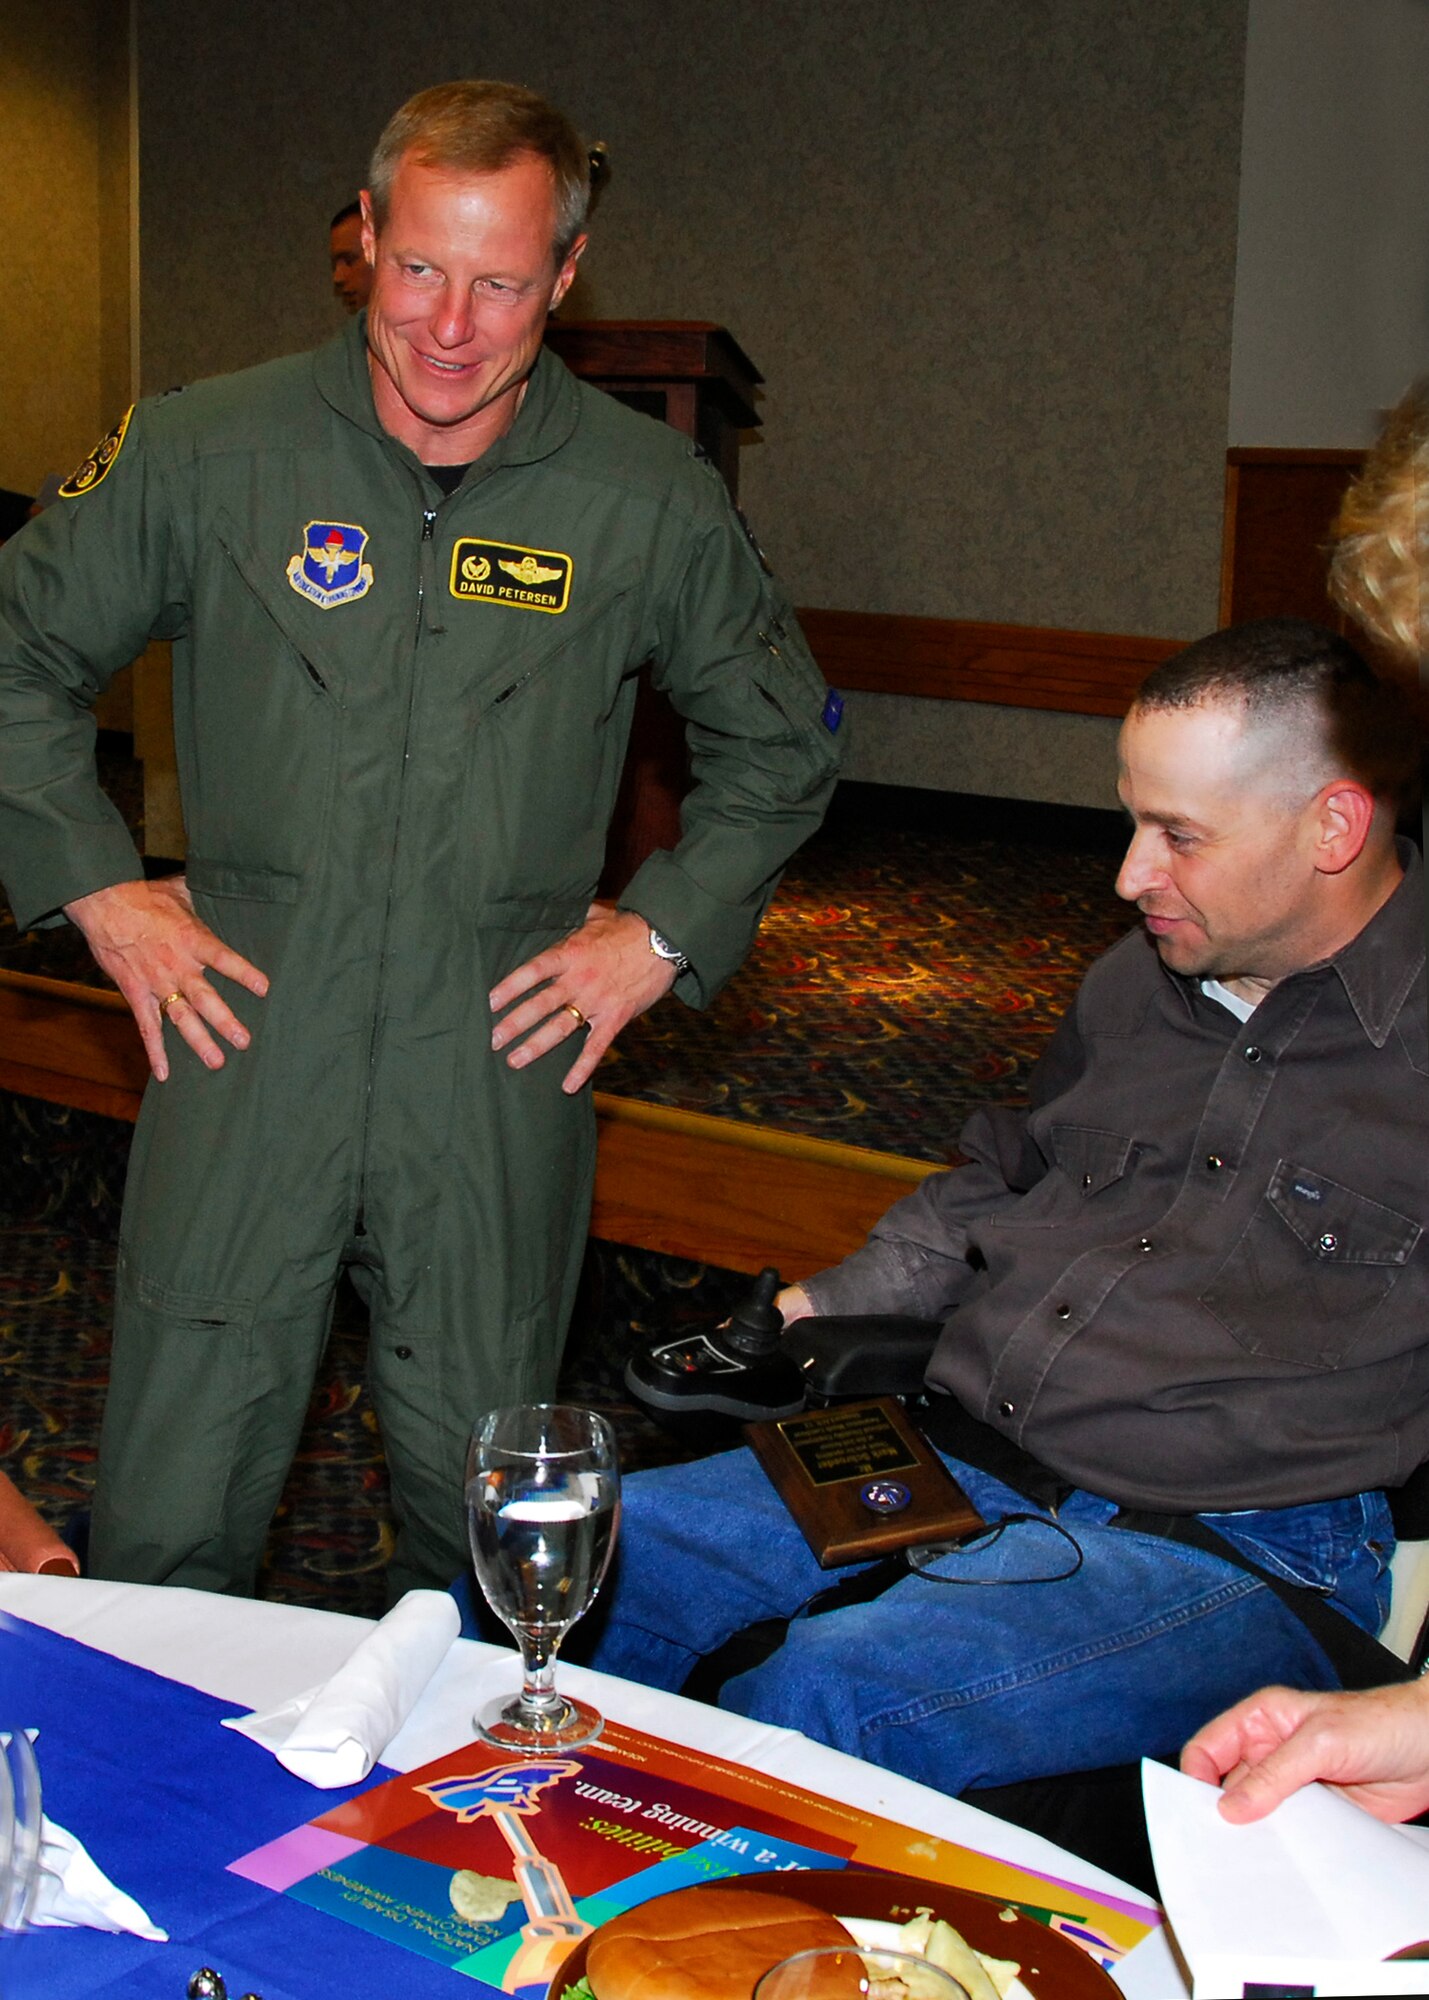 Col David Peterson, 80th Flying Training Wing commander, speaks with guest speaker Mark Schroeder at the Annual National Disability Employment Awareness Month luncheon held at the Sheppard Club Oct. 23. (U.S. Air Force photo/Harry Tonemah)